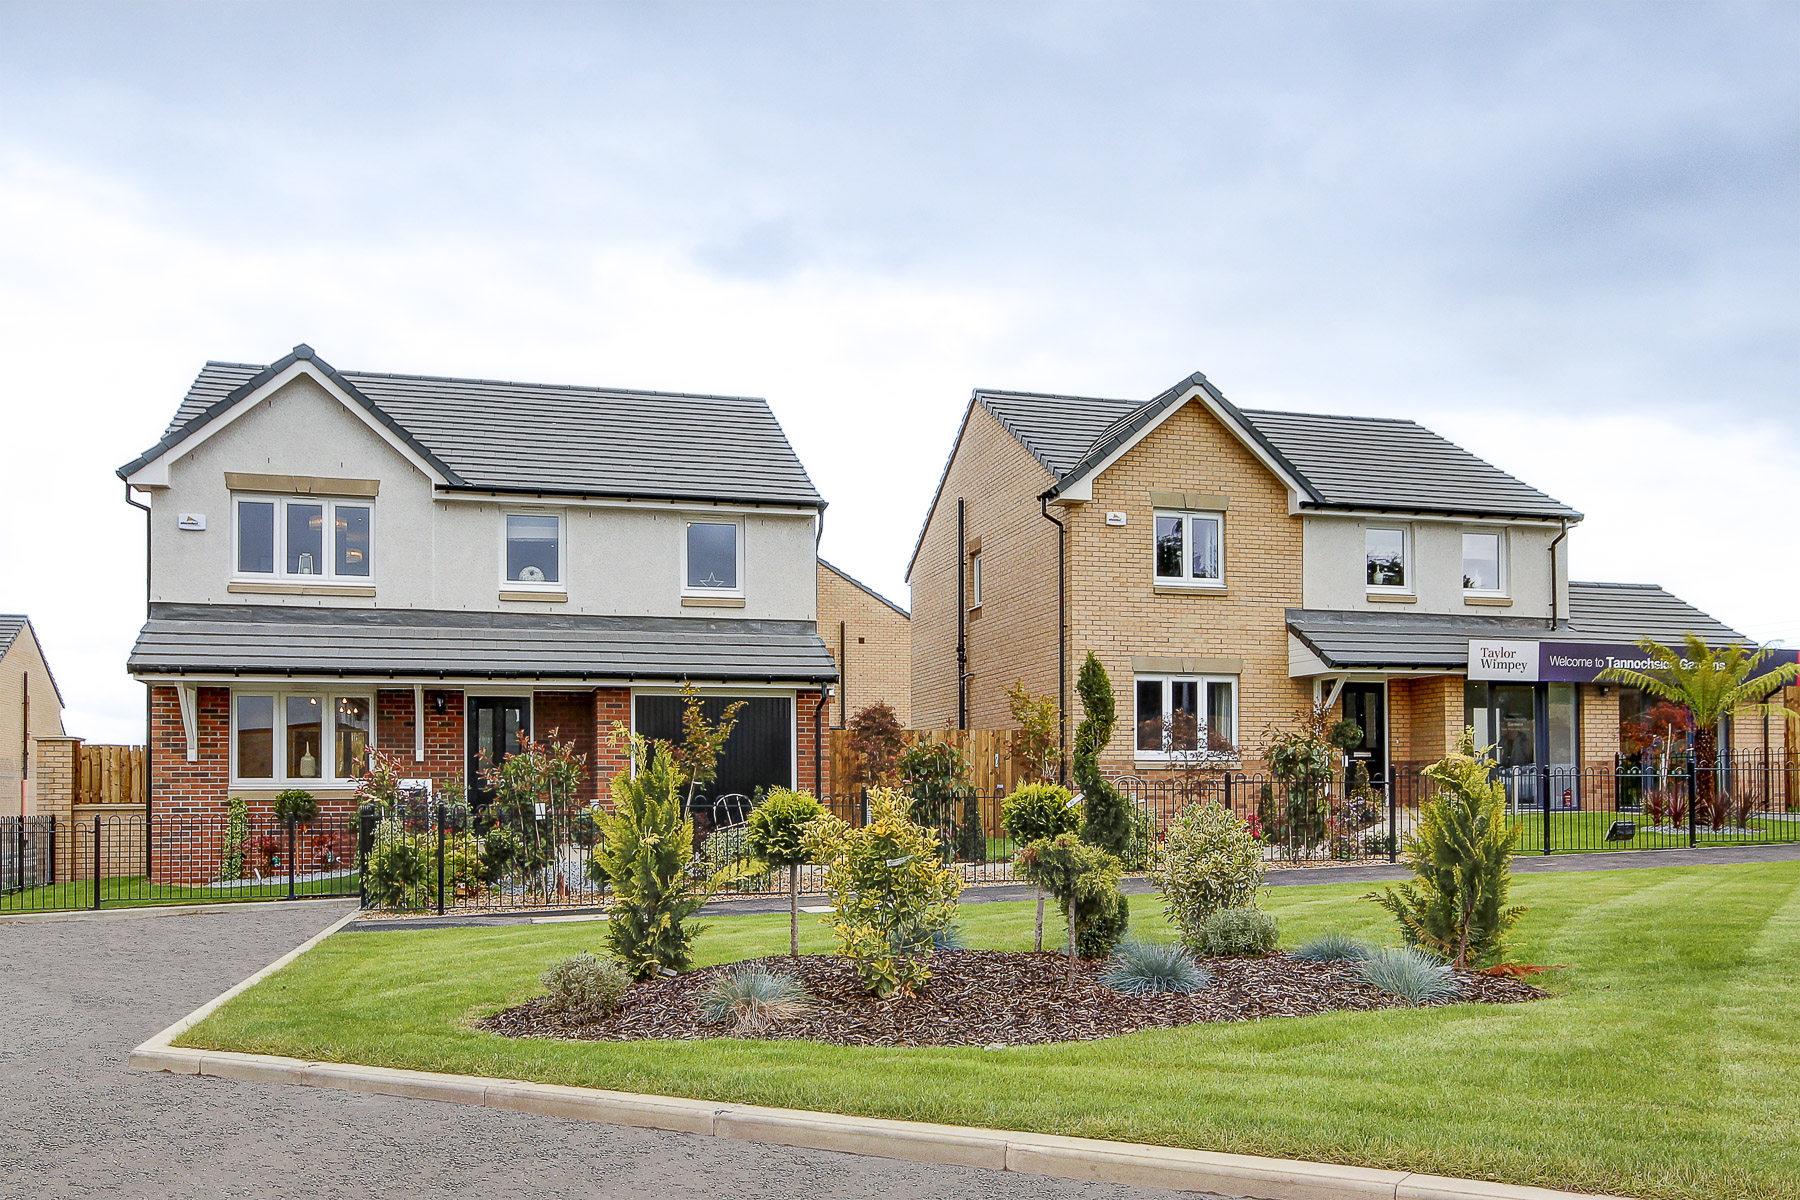 Taylor Wimpey gets green light for 110 new Linwood homes